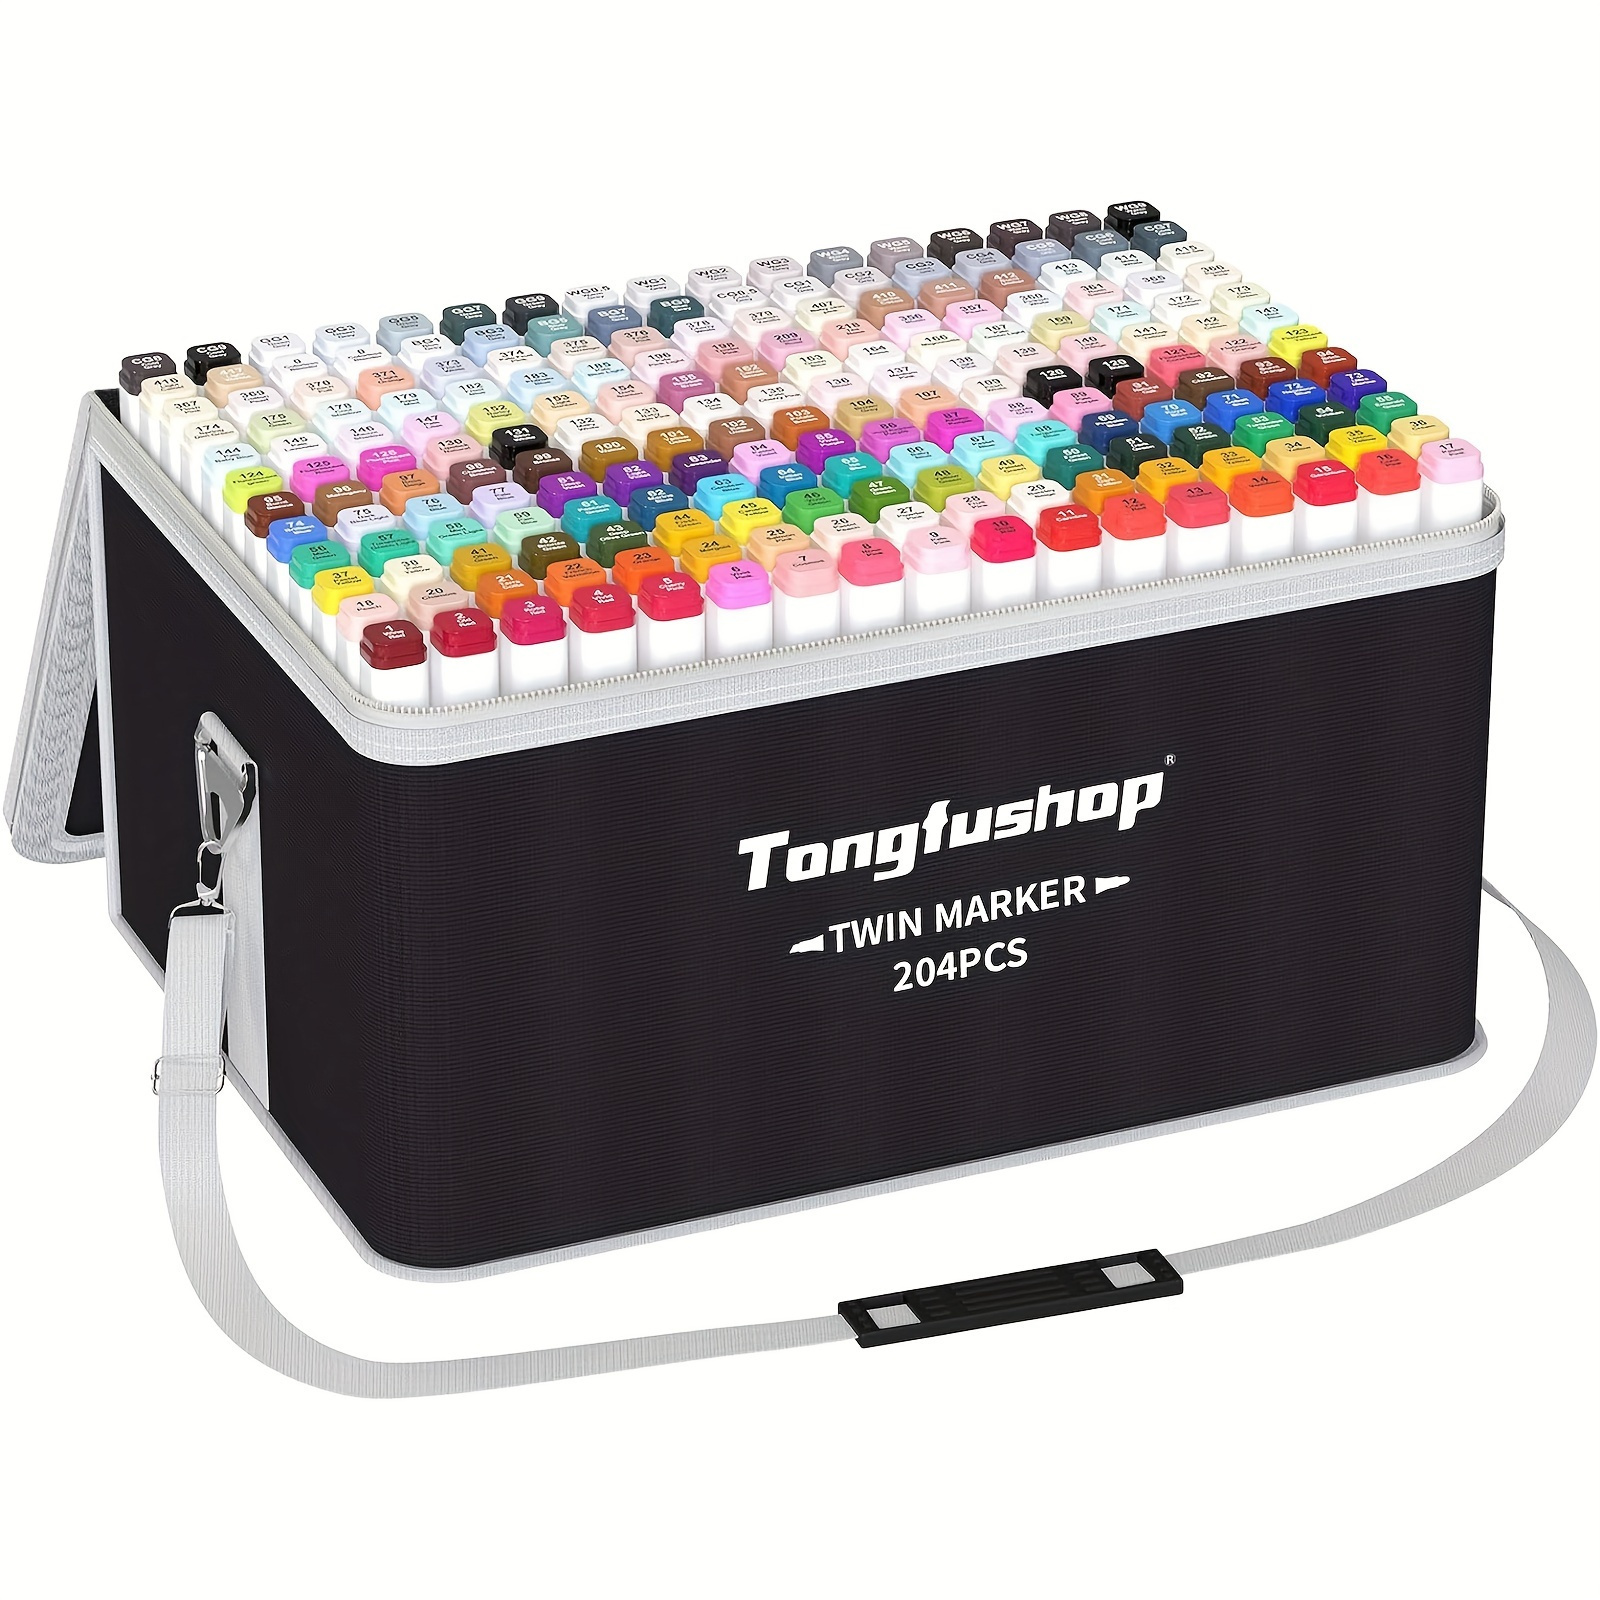 

Tongfushop 204 Colors Alcohol Markers, Double Tip Blender Art Drawing Markers Set, Professional Permanent Sketch Markers For Adult Coloring Illustrations With Organizing Case, Pad